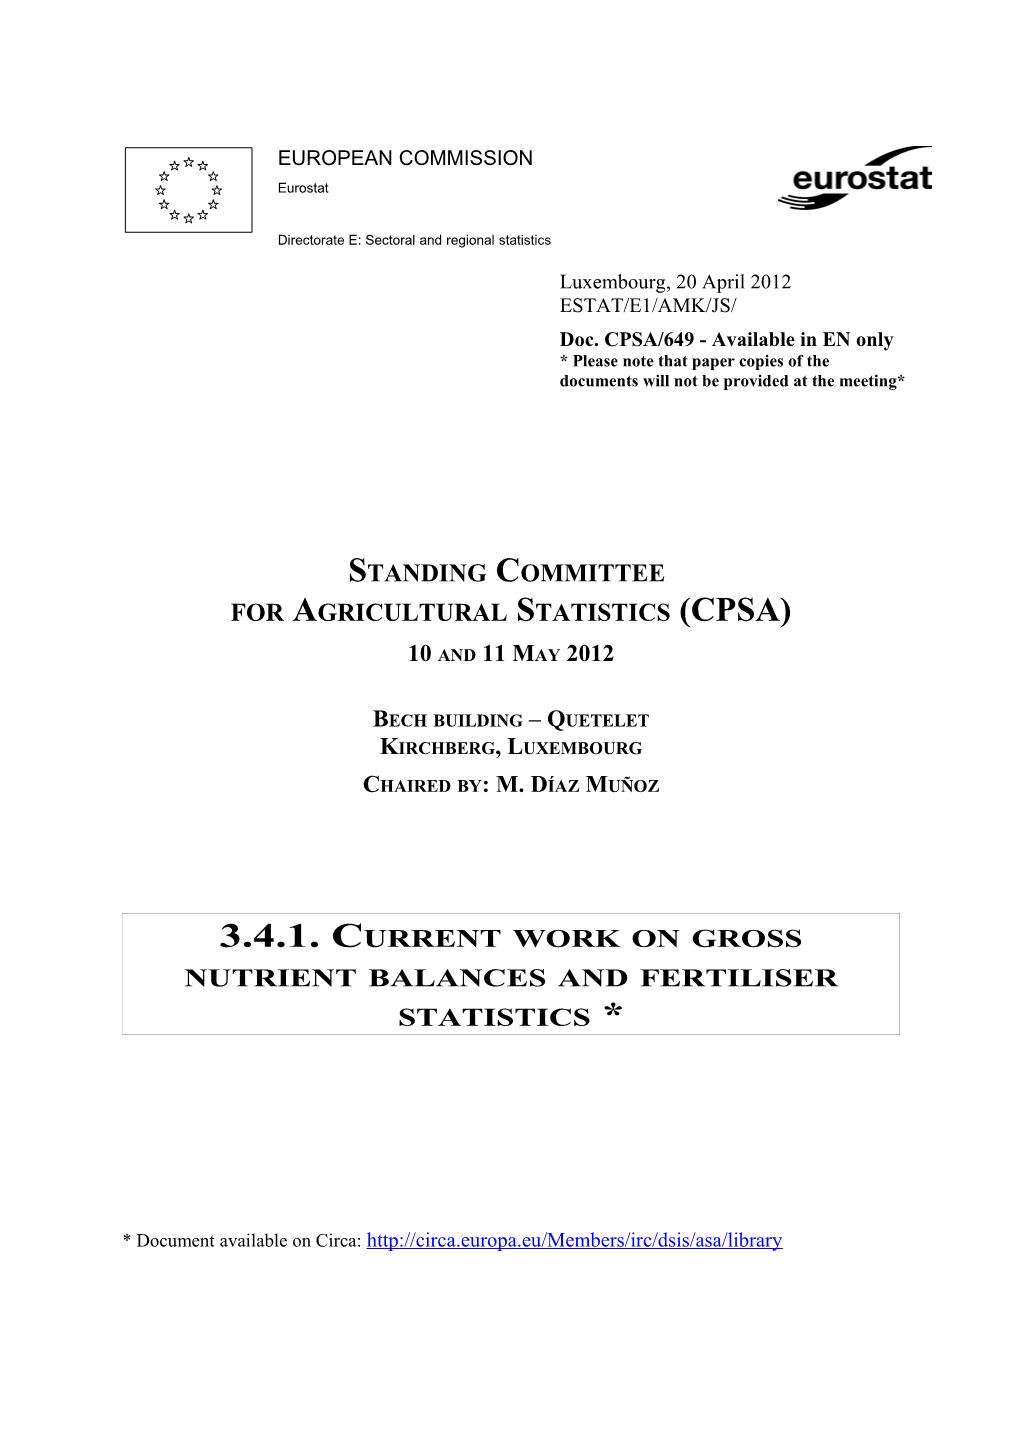 Standing Committee for Agricultural Statistics (CPSA)